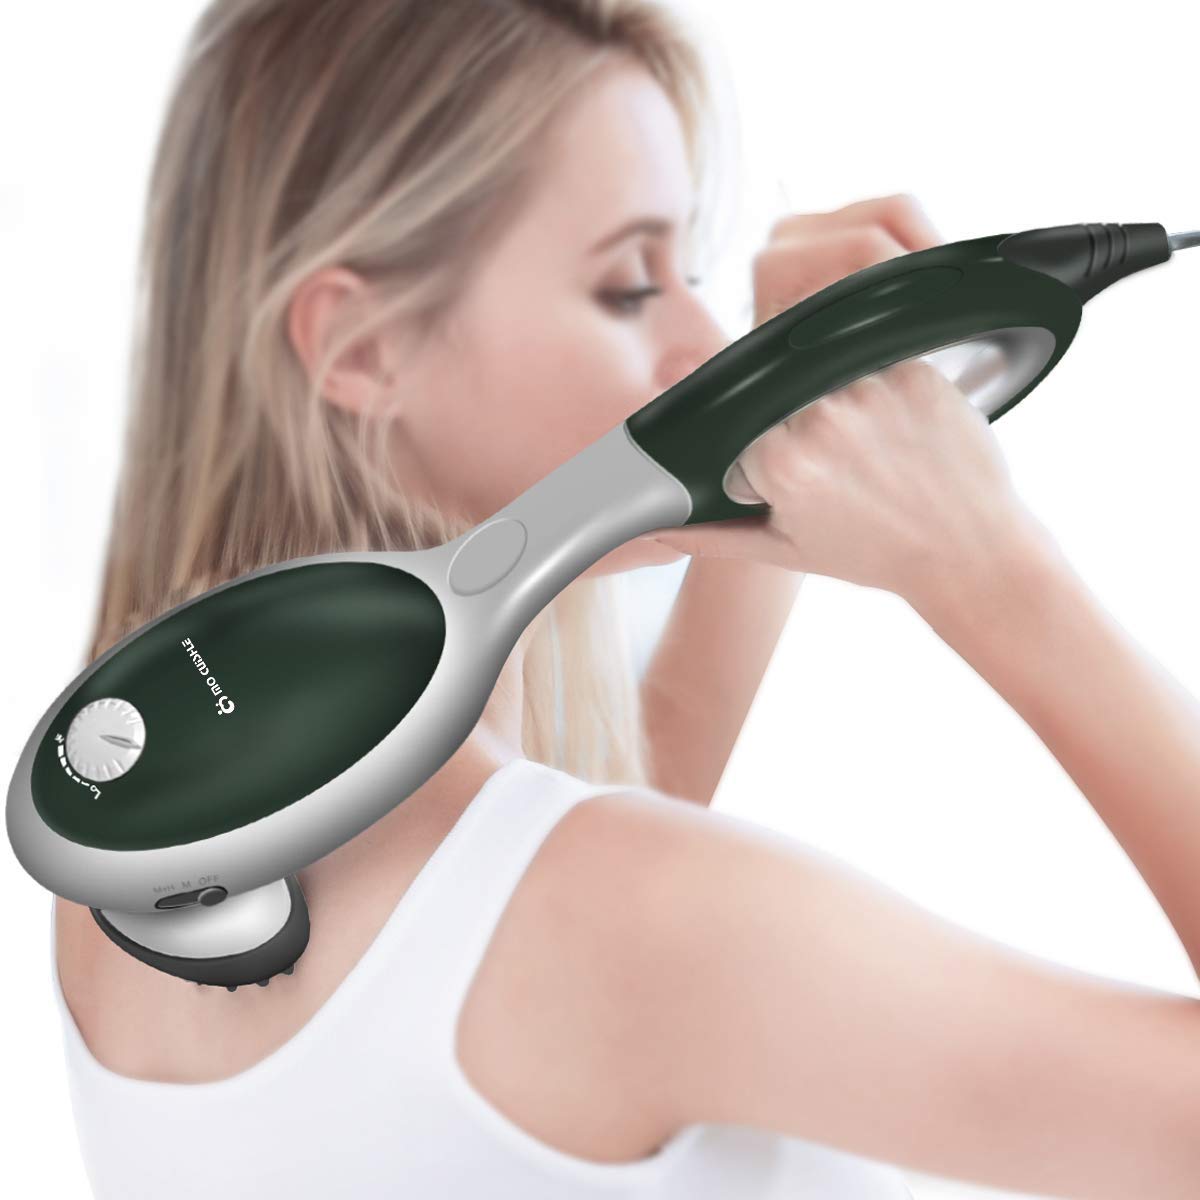 Percussion Back Massager with Heat - Electric Handheld Massager - Deep Tissue Massage for Back, Shoulder, Neck, Leg and Foot - Christmas Gift for Men, Women, Dad, Mom, Family - Relief Muscle Fatigue